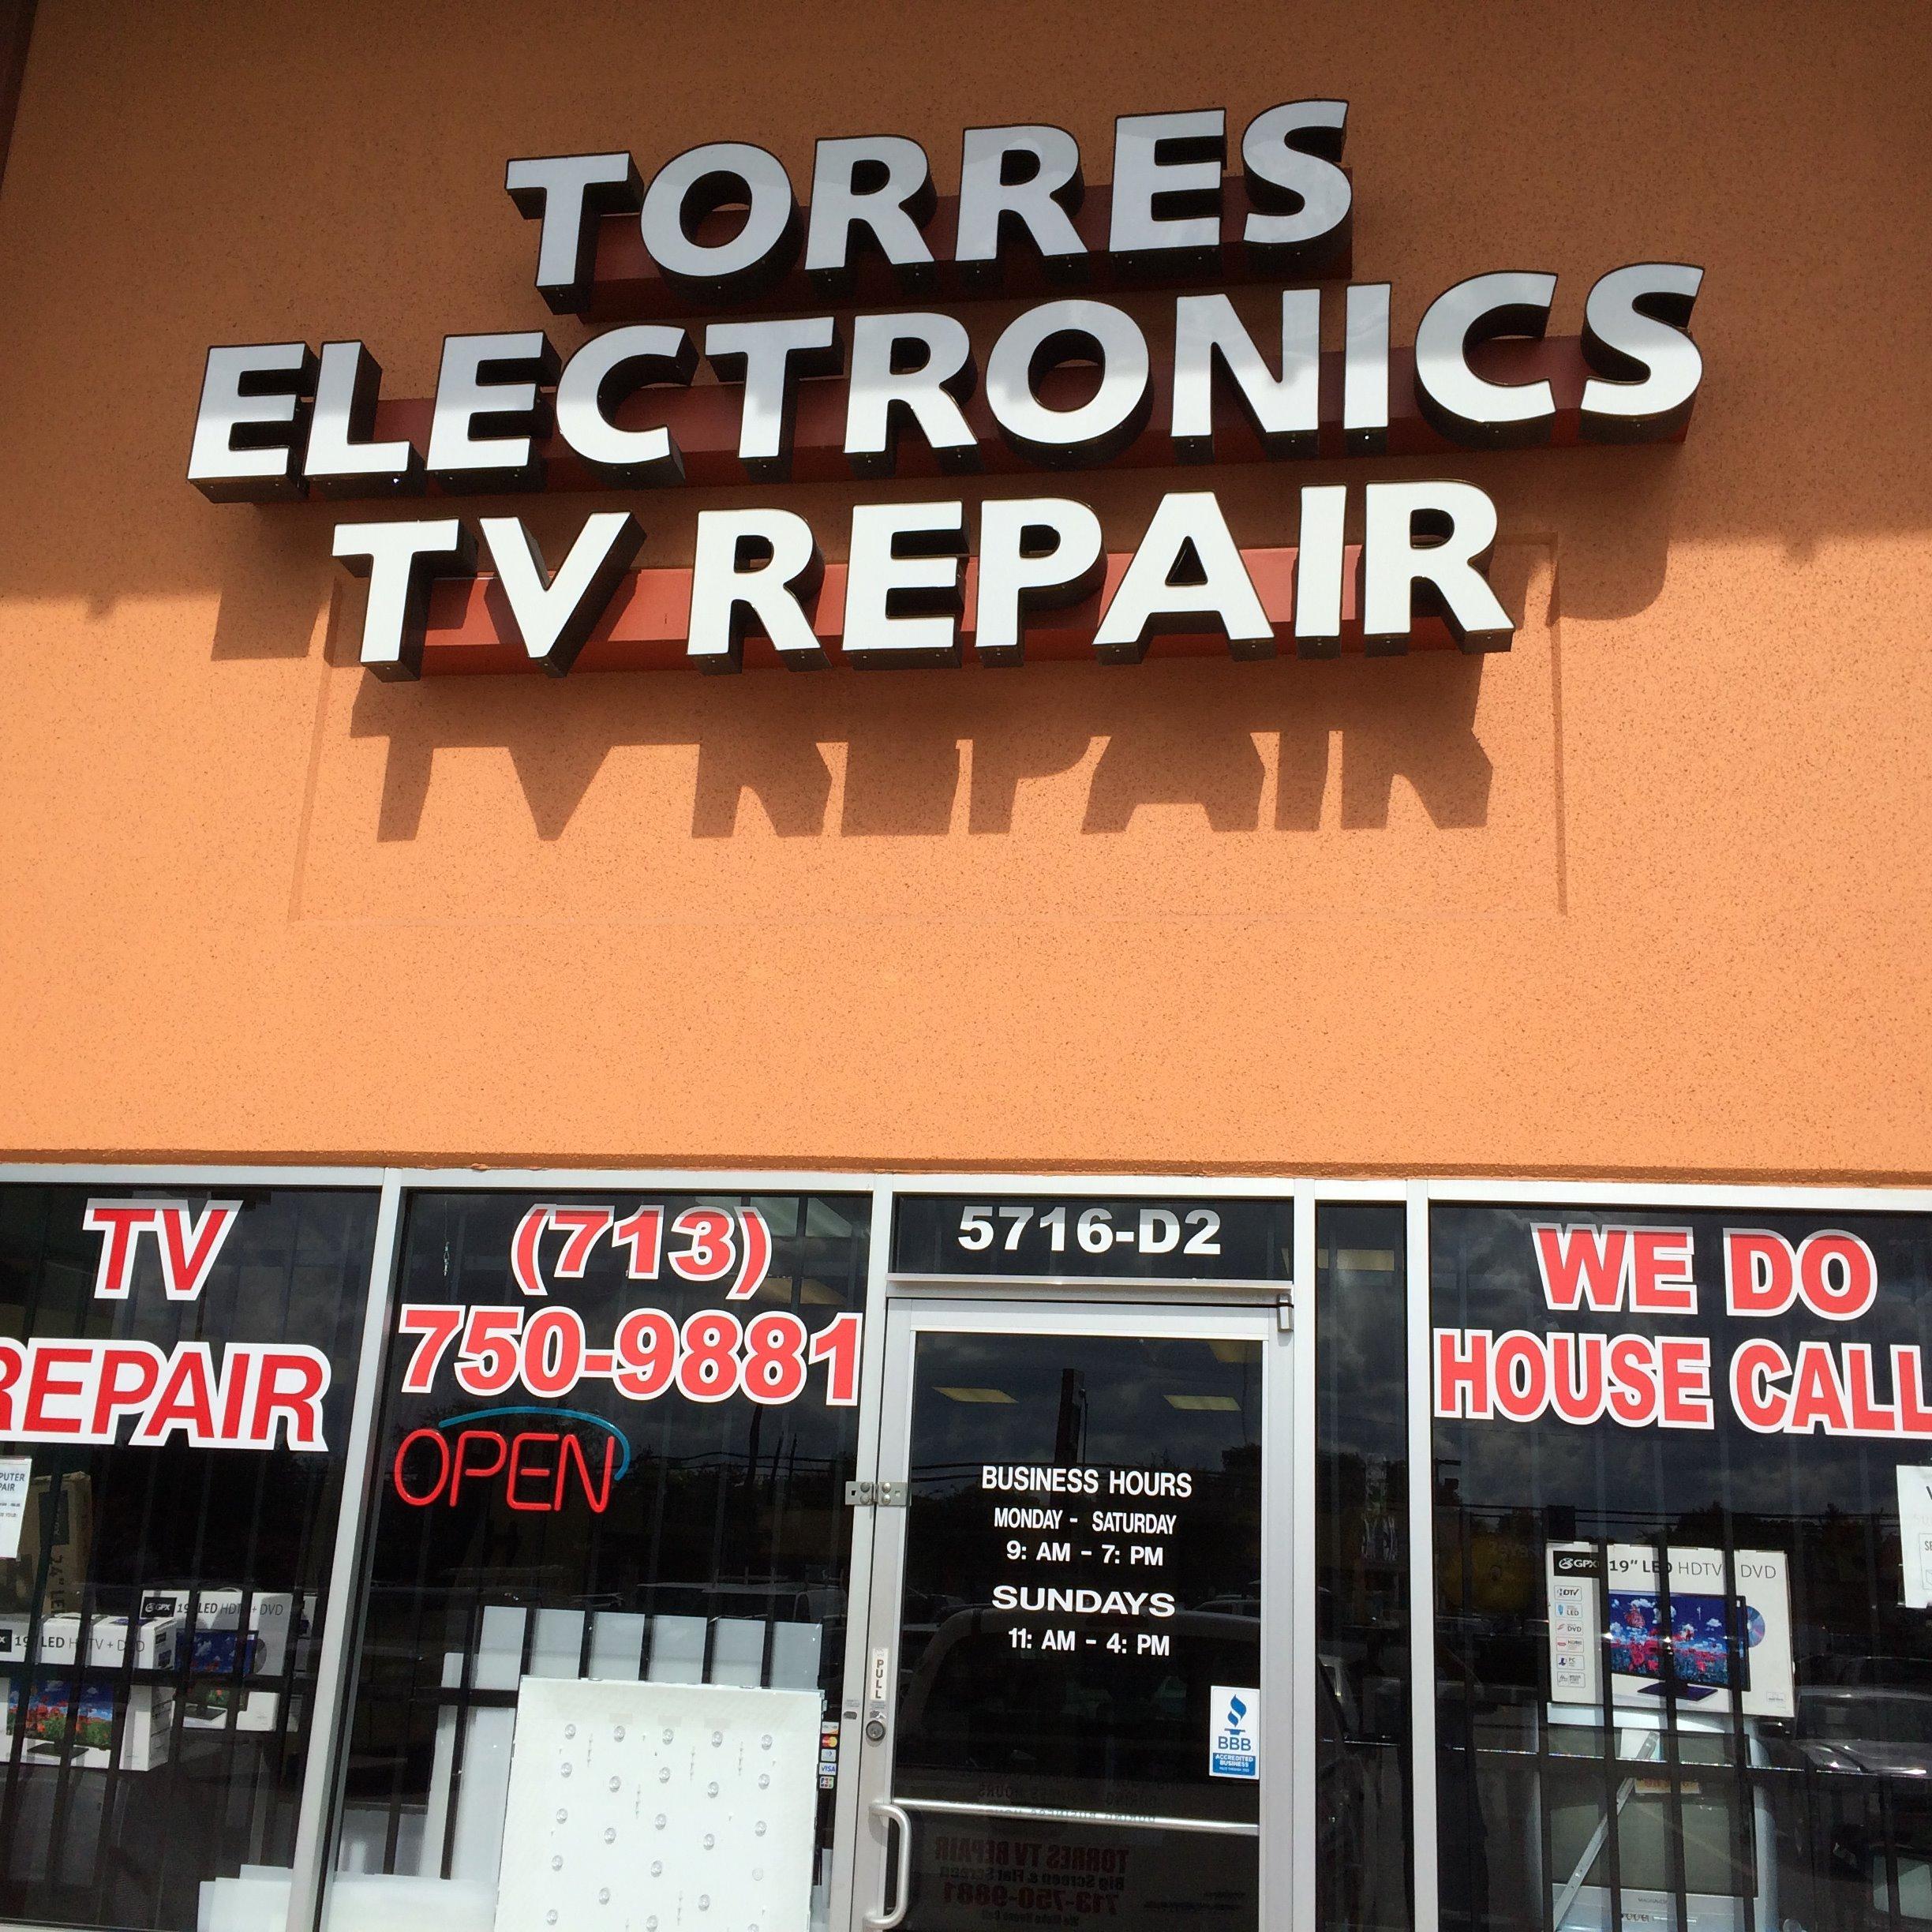 TORRES ELECTRONICS TV REPAIR AND PARTS Coupons near me in ...